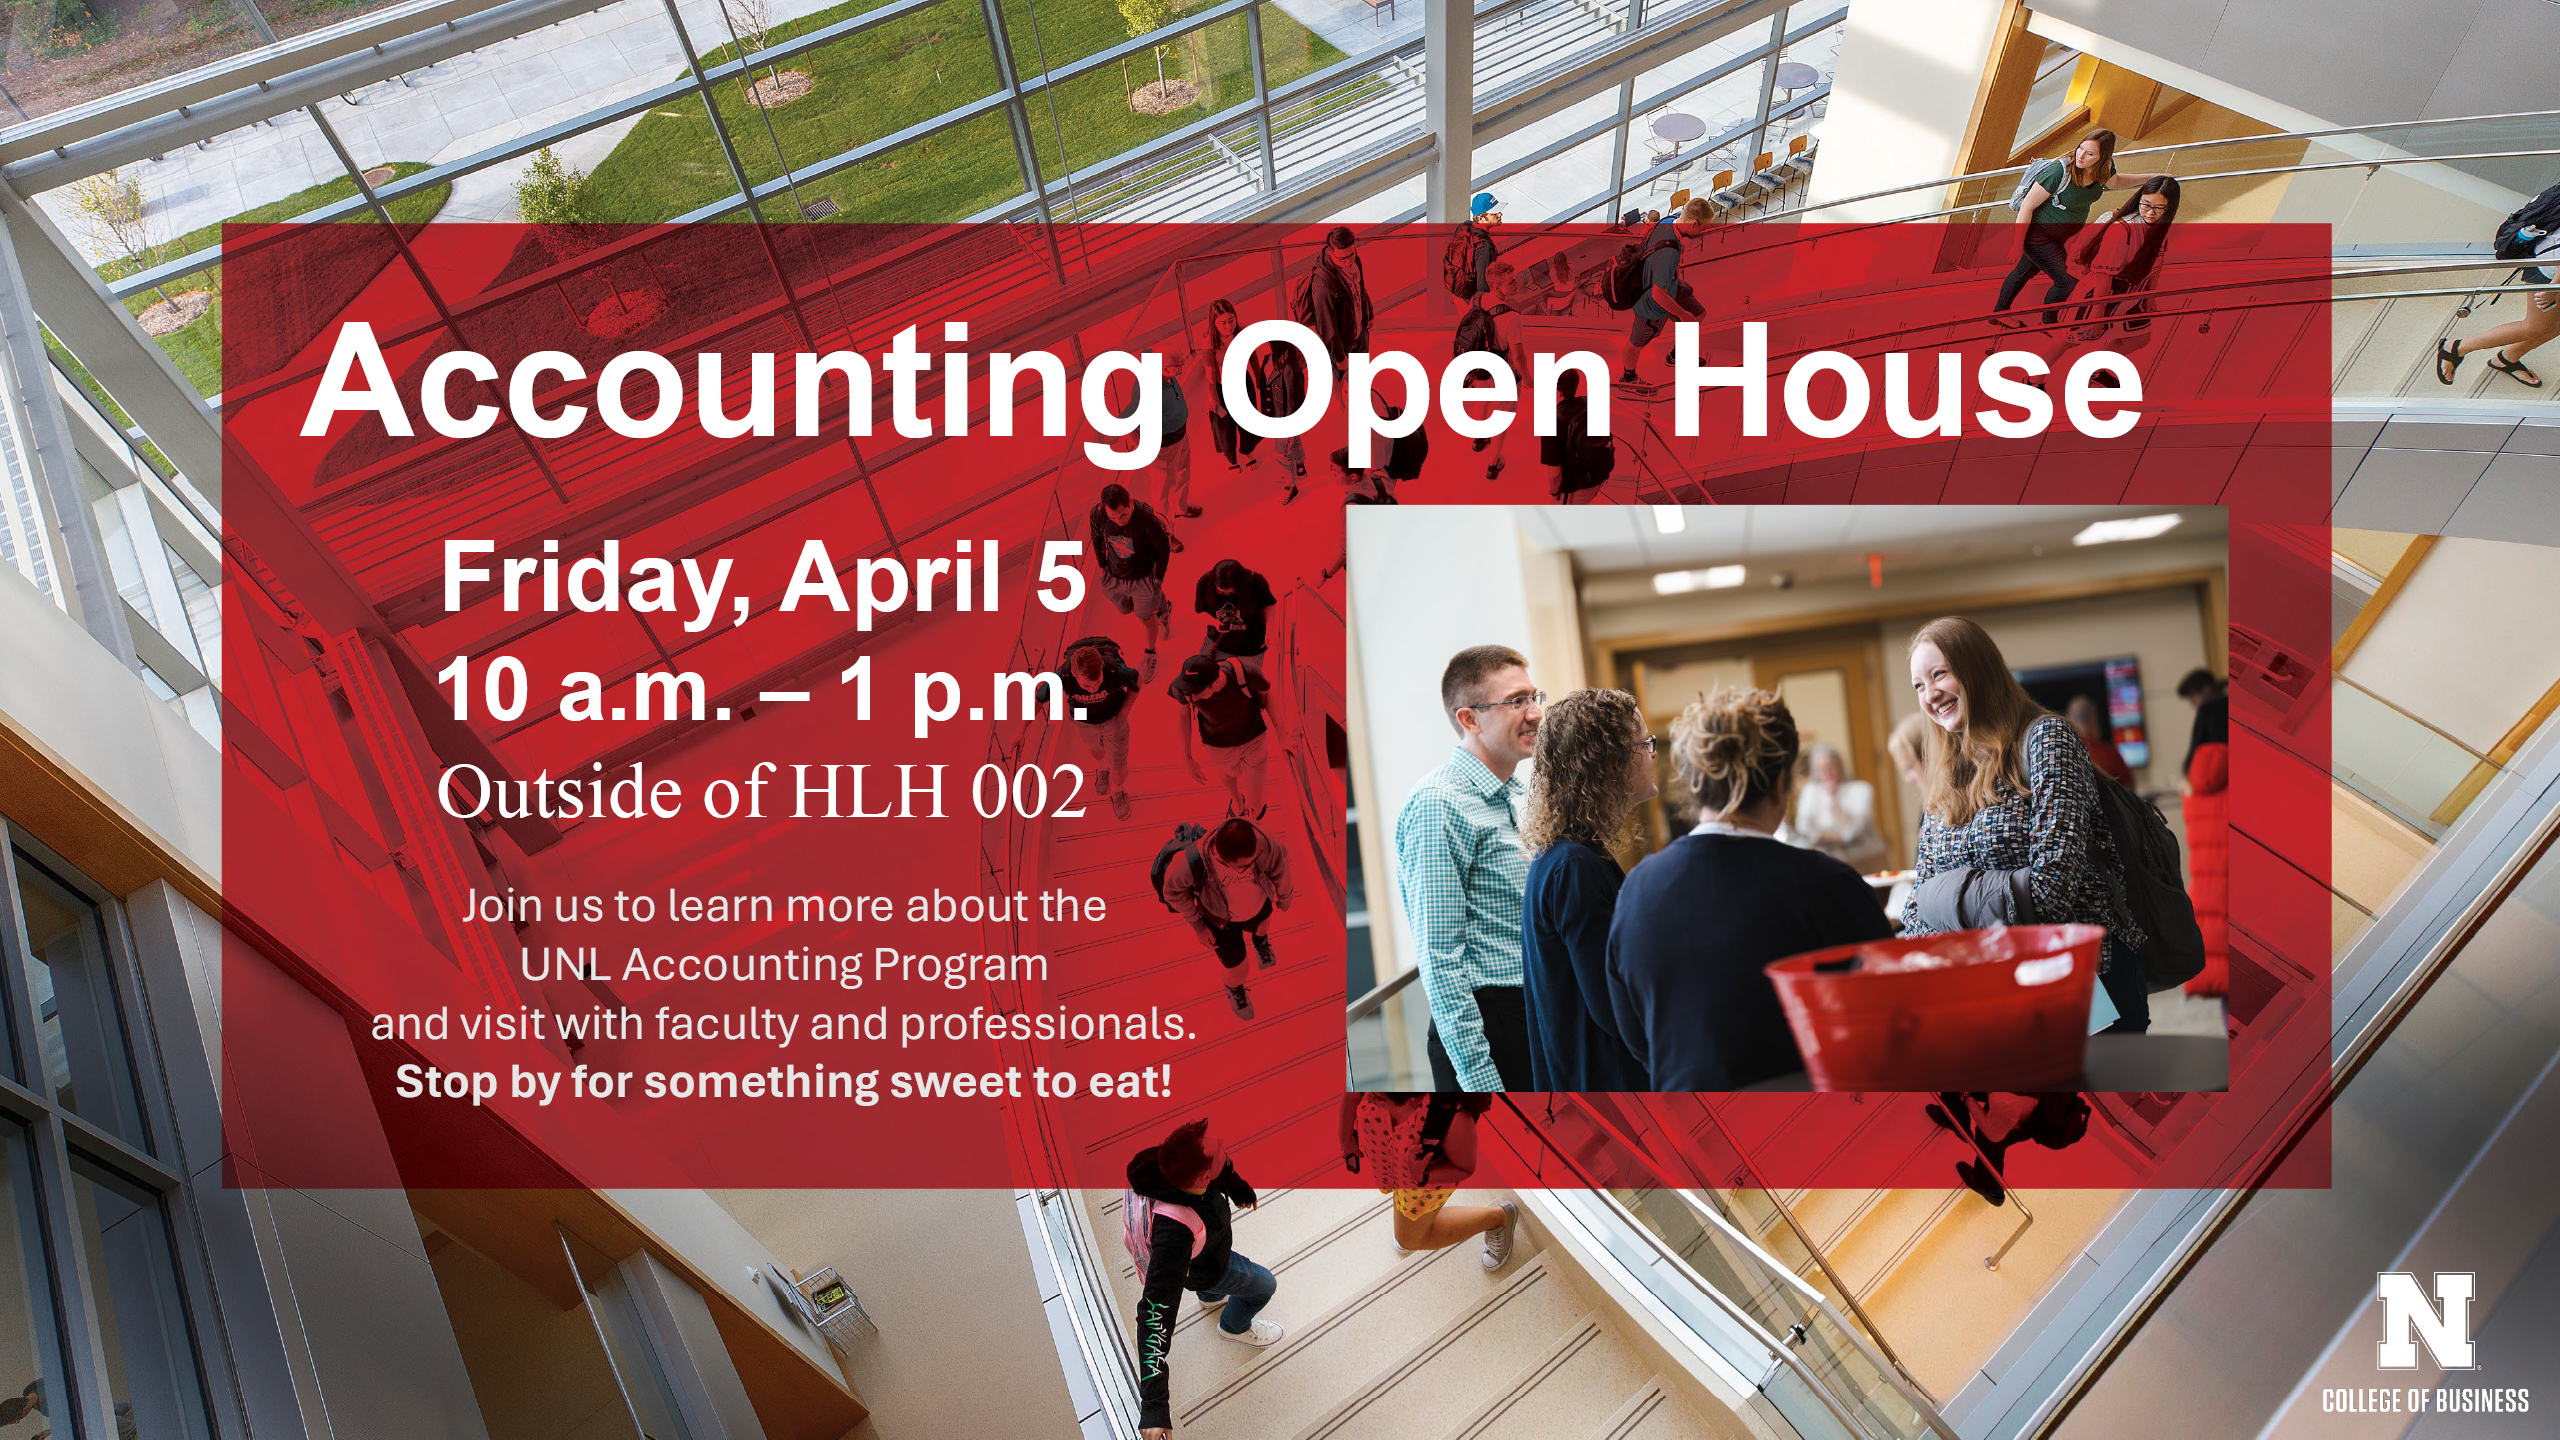 Accounting Open House | Friday April 5, 10 a.m. to 1 p.m. | outside HLH 002